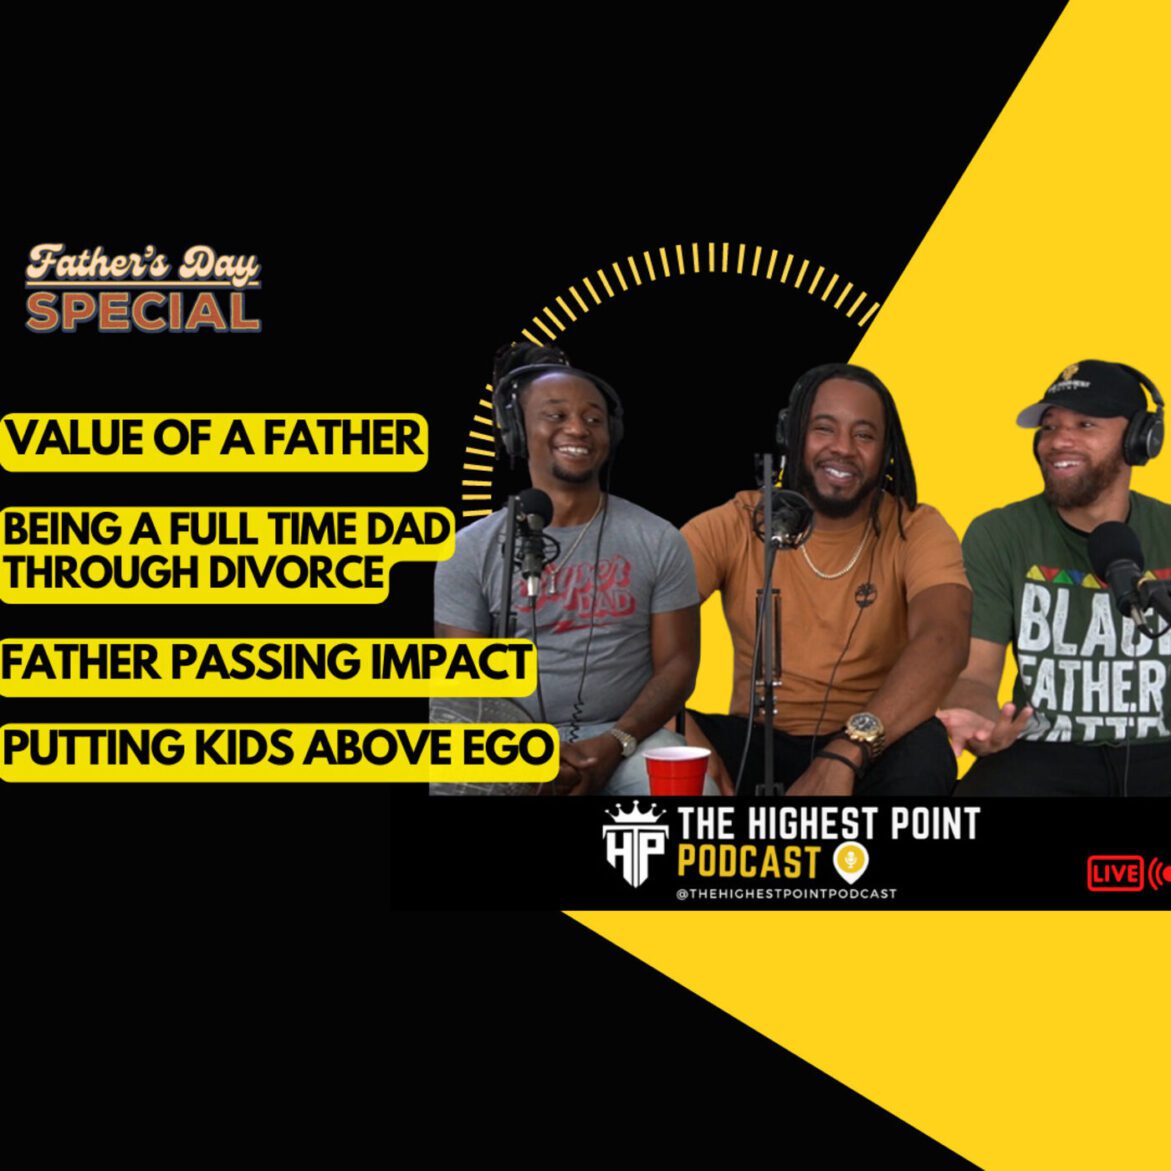 Black Podcasting - Celebrating Father's Day, Being a full time Dad through Divorce, Value of Father, Losing a Father impact, Putting kids above ego and more